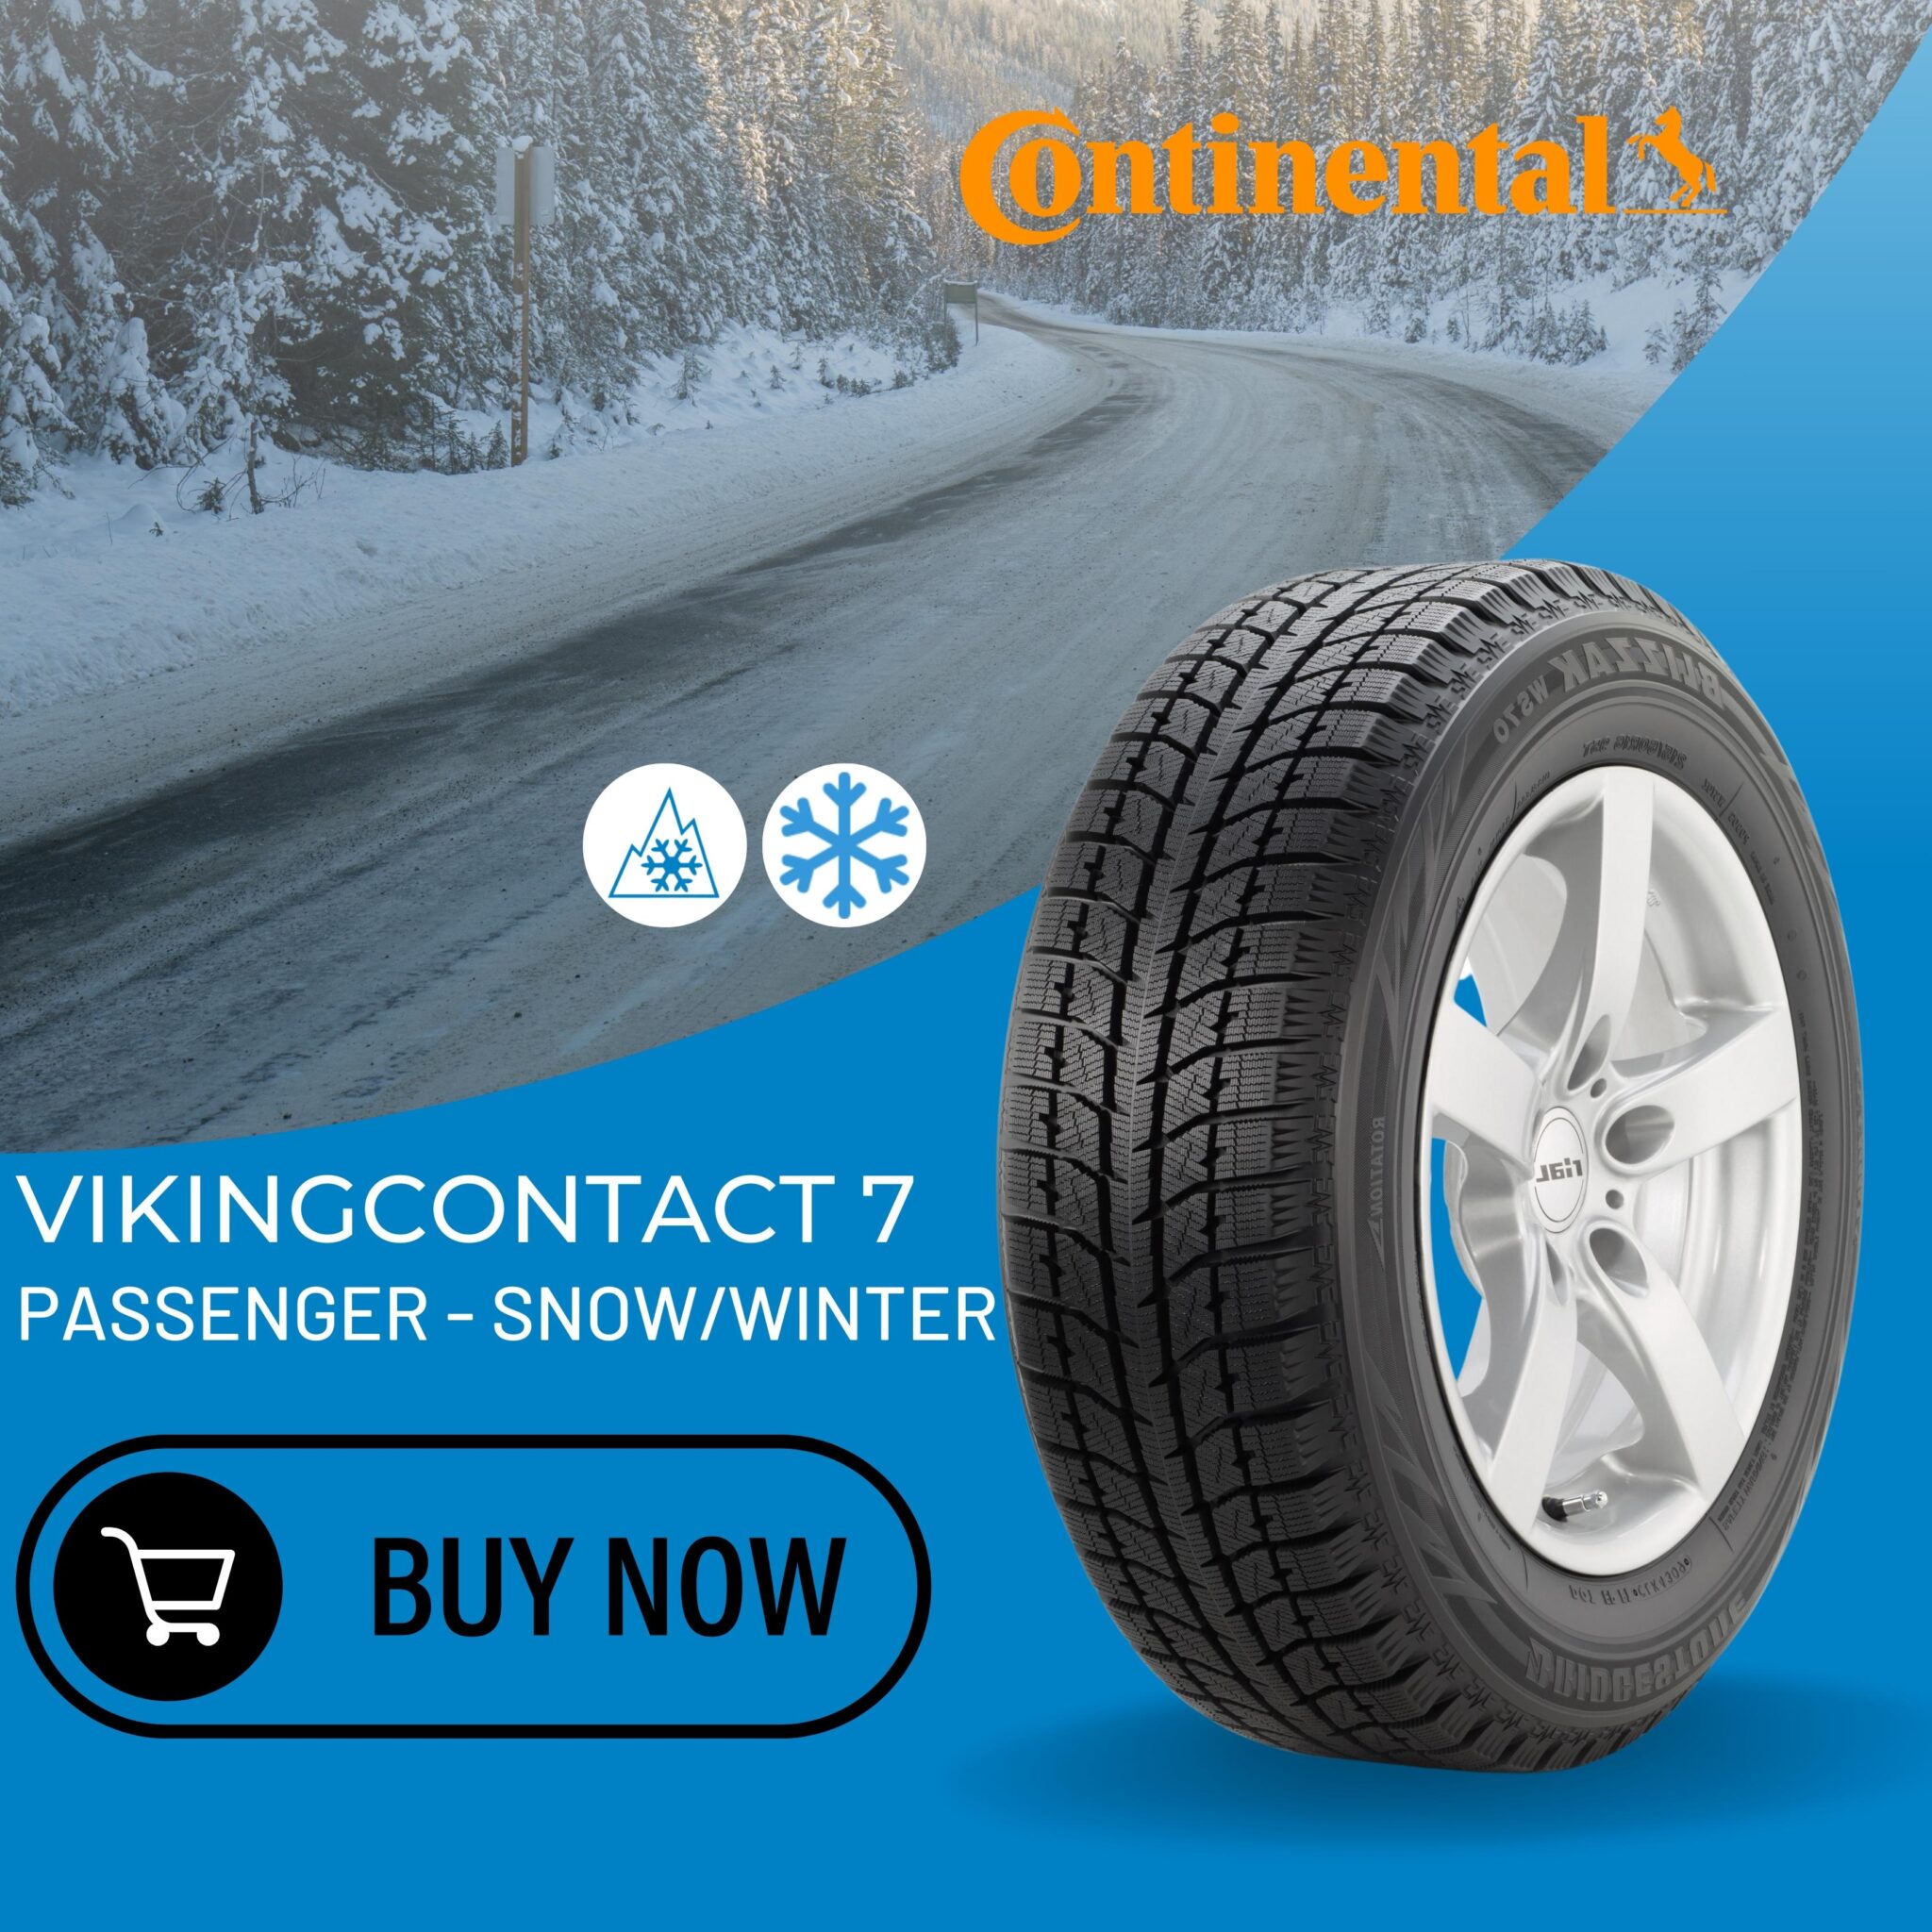 The Best Winter and Snow Tires You Can Buy